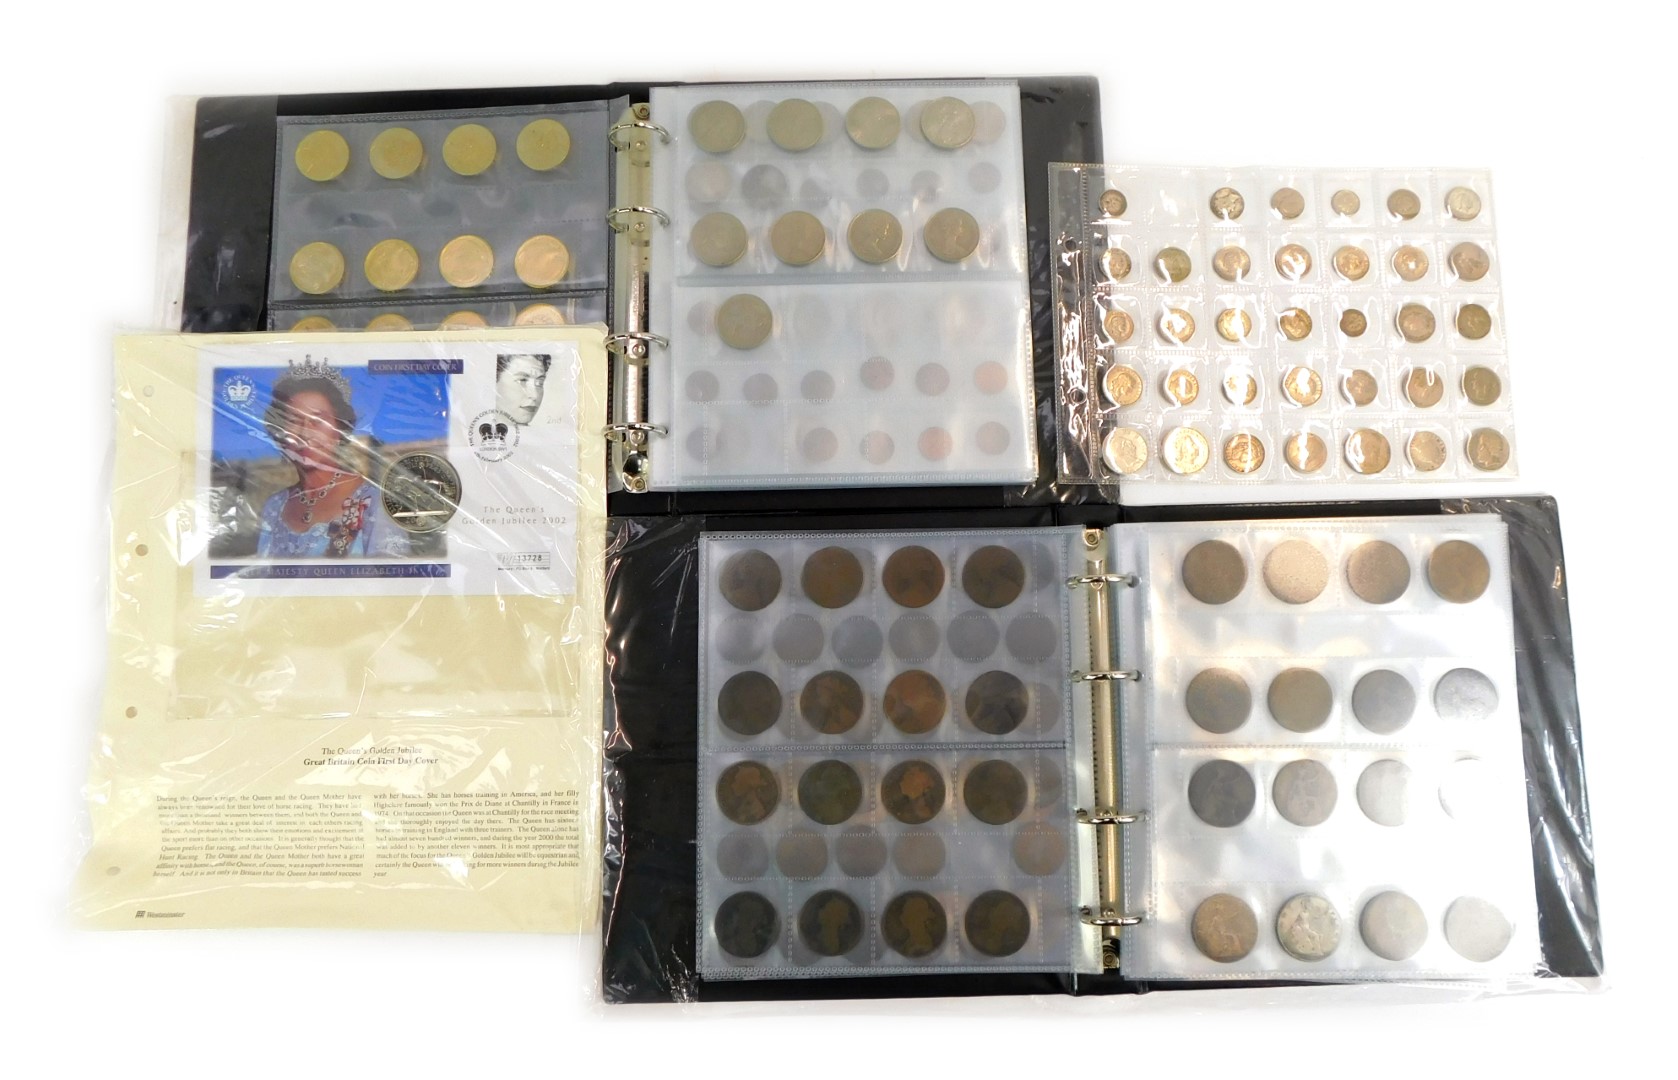 A quantity of America nickel silver coins, commemorative and other British £2 and 50p coins, coin co